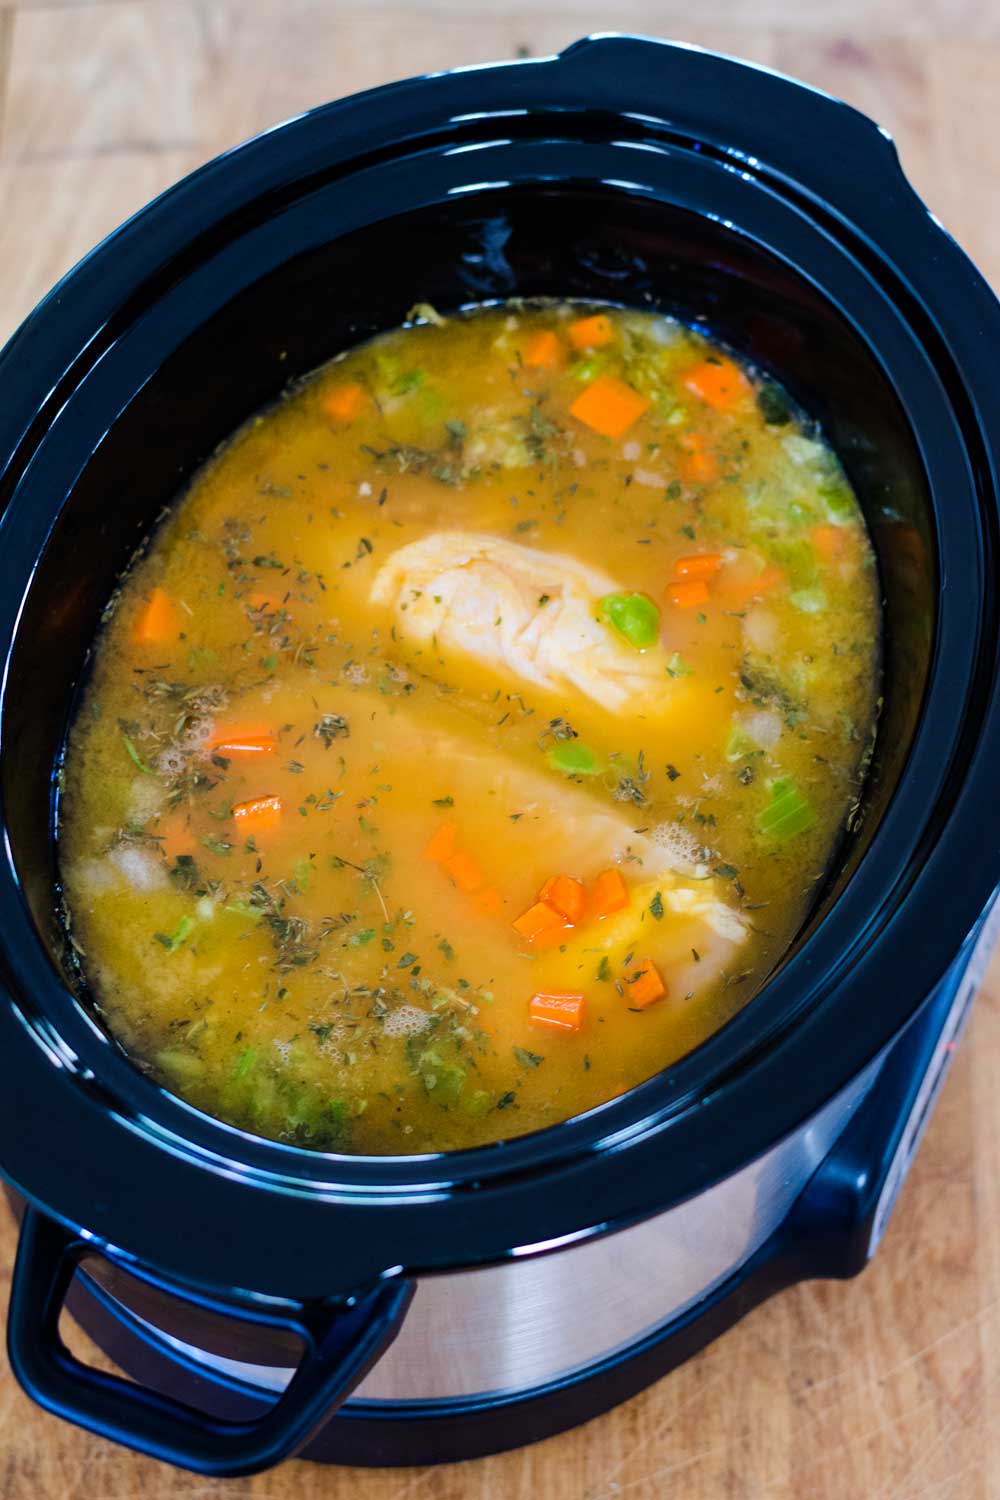 Crock Pot Chicken Soup (Keto, Paleo, Whole30) - Cook Eat Well